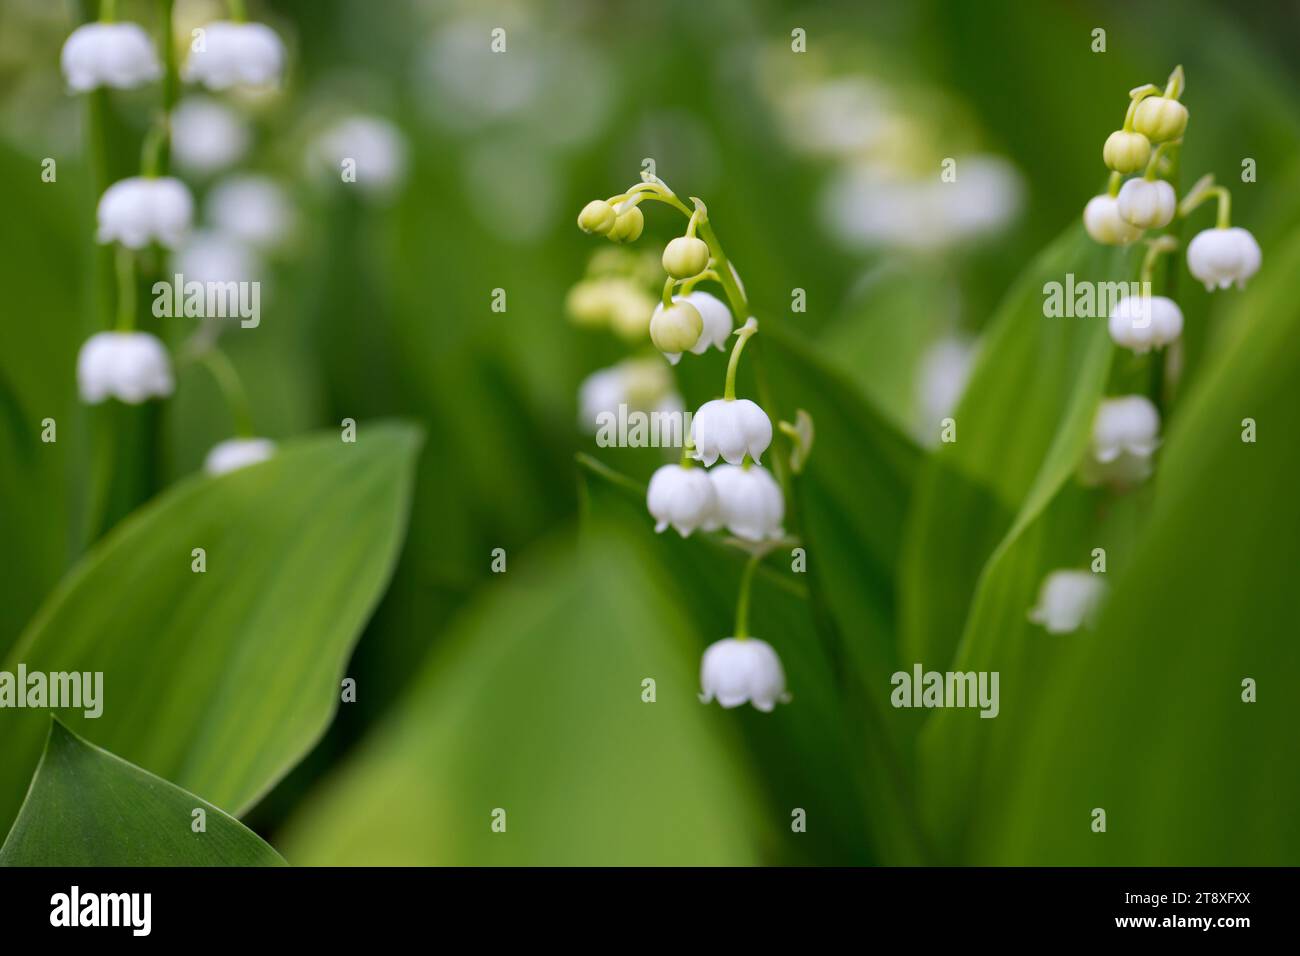 Lily of the valley / May bells / muguet (Convallaria majalis), bell-shaped white flower blooming in forest in spring Stock Photo